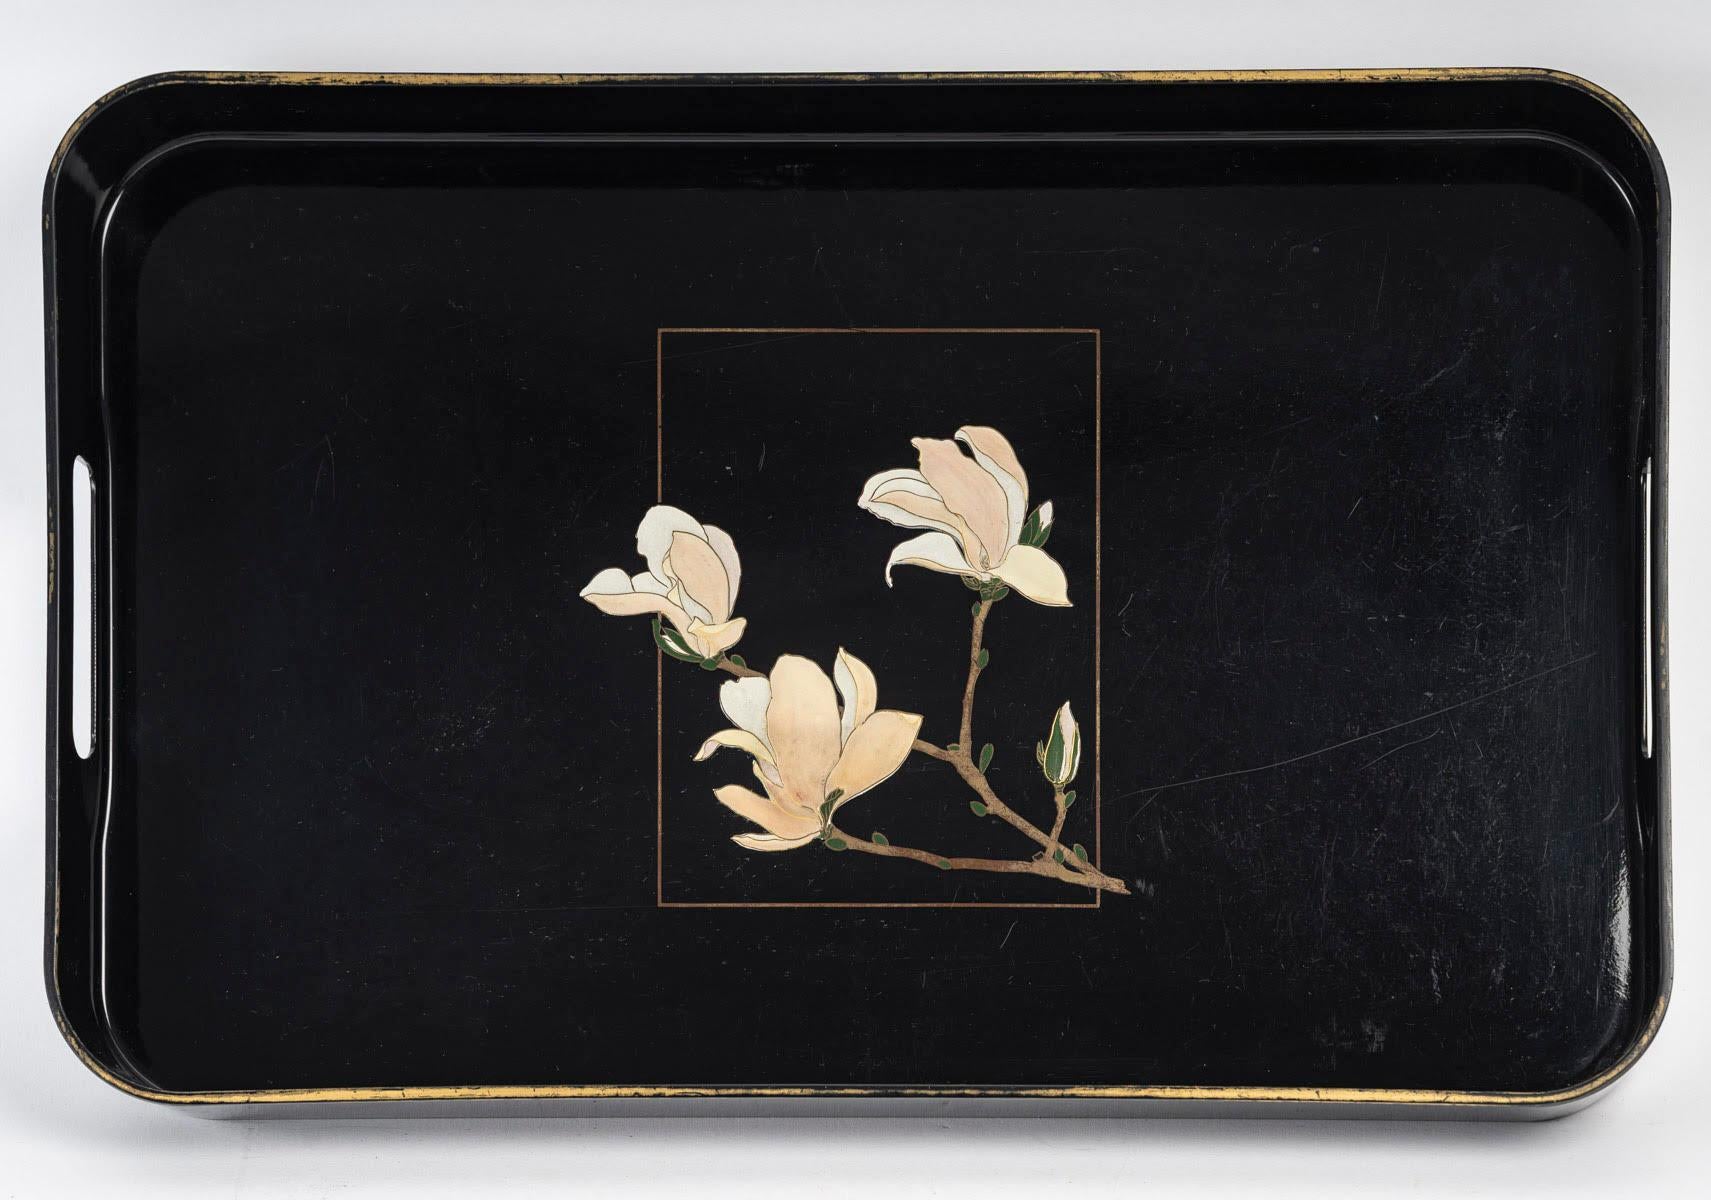 Black lacquered wooden tray with floral motifs, circa 1980.

Lacquered wooden tray from the 1980s with pretty floral motifs in the centre.
h: 4.5cm, w: 54cm, d: 34cm